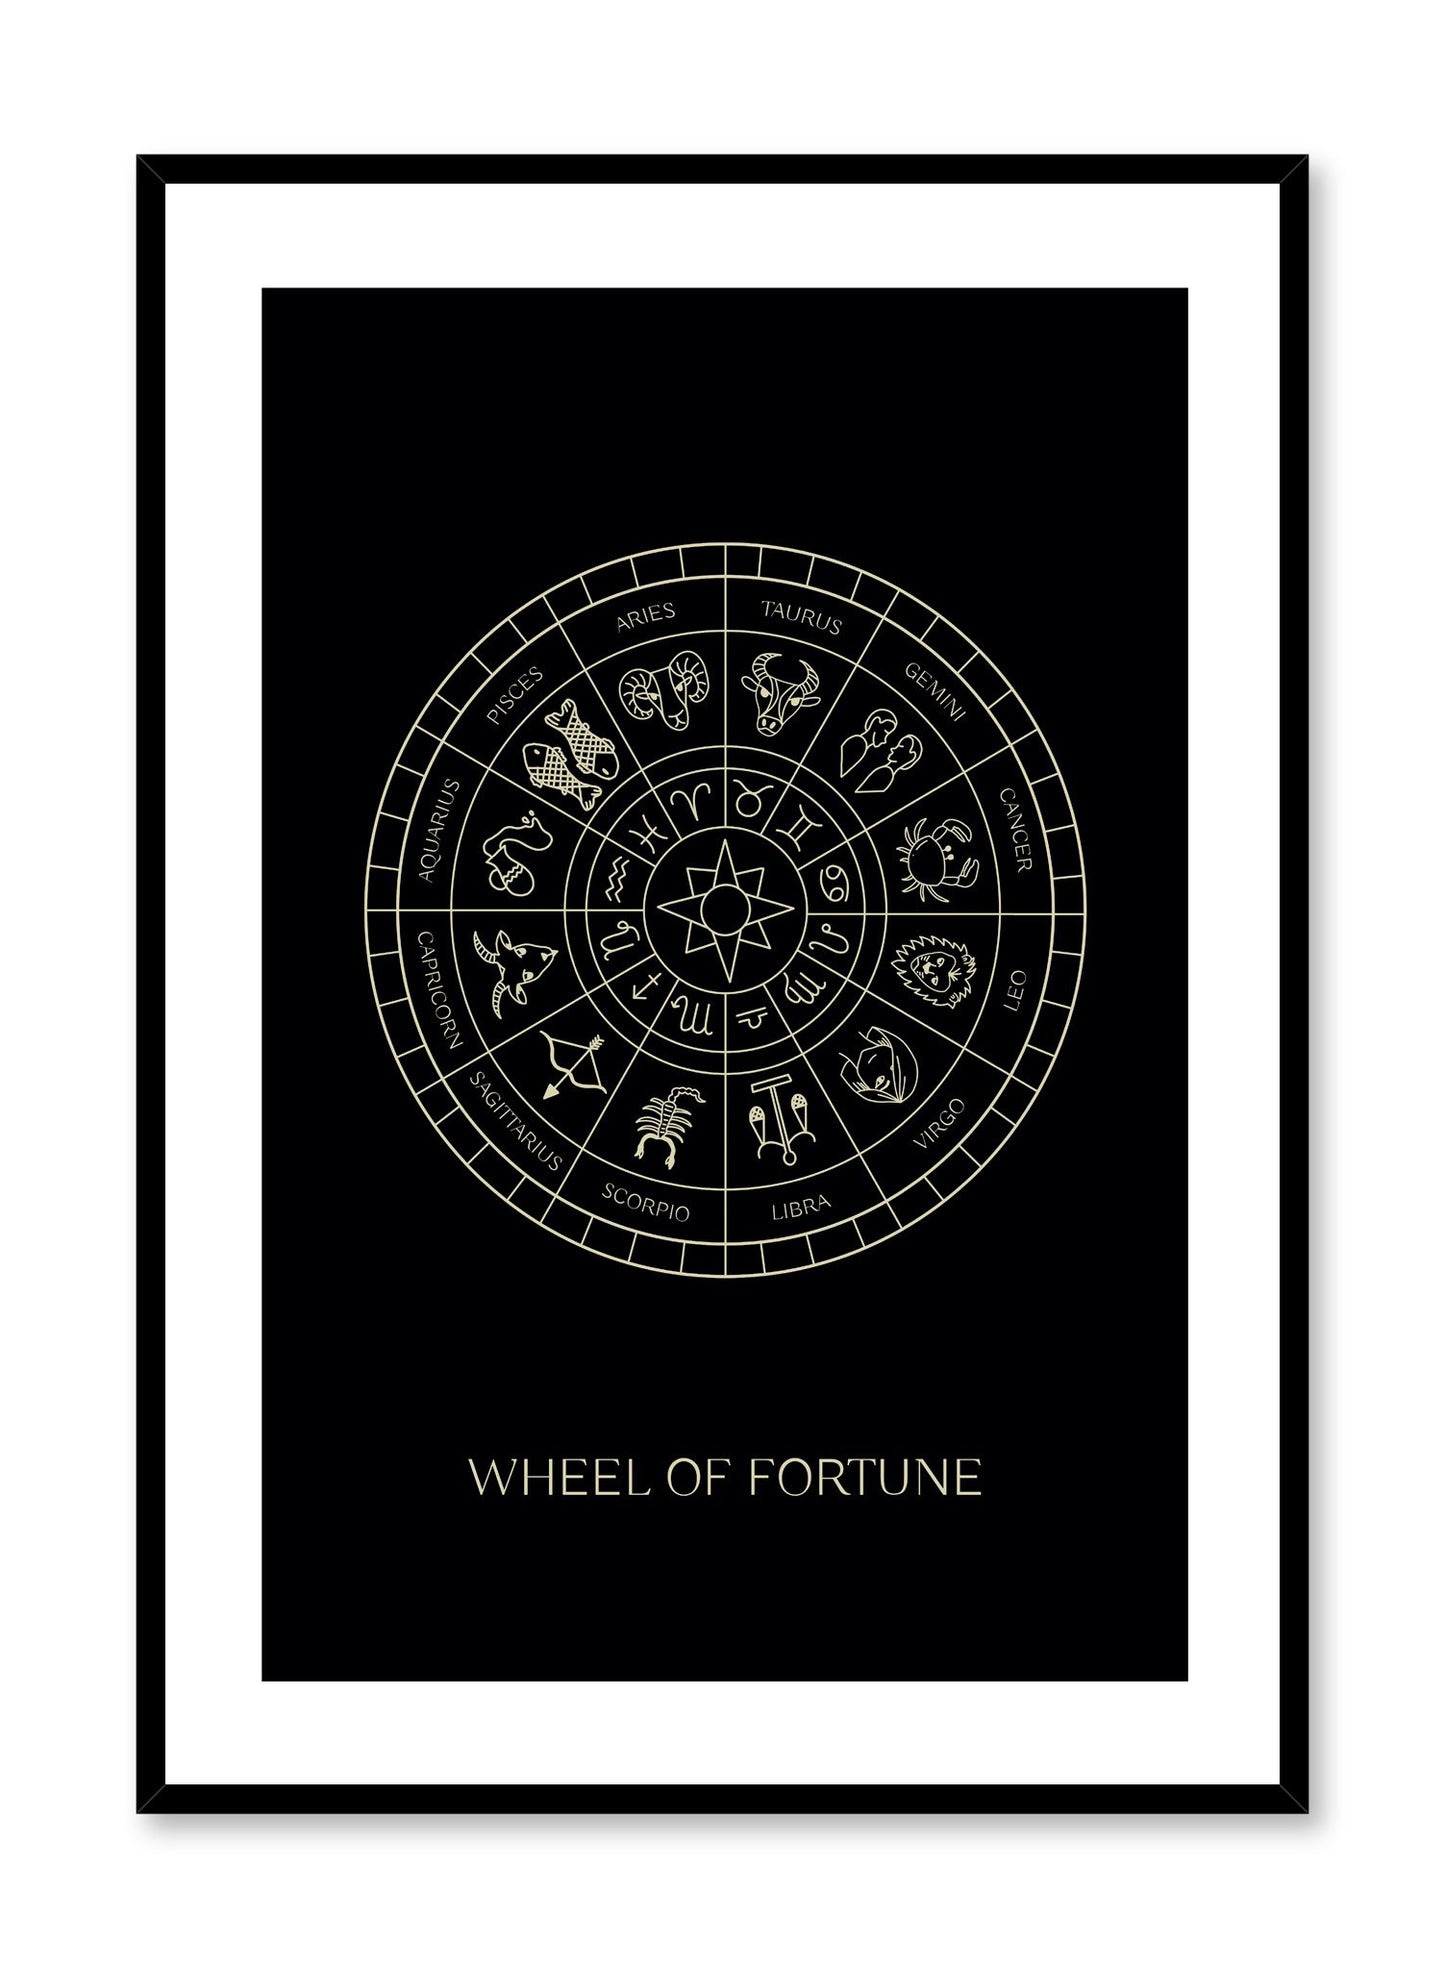 Celestial illustration poster by Opposite Wall with Wheel of Fortune Tarot card